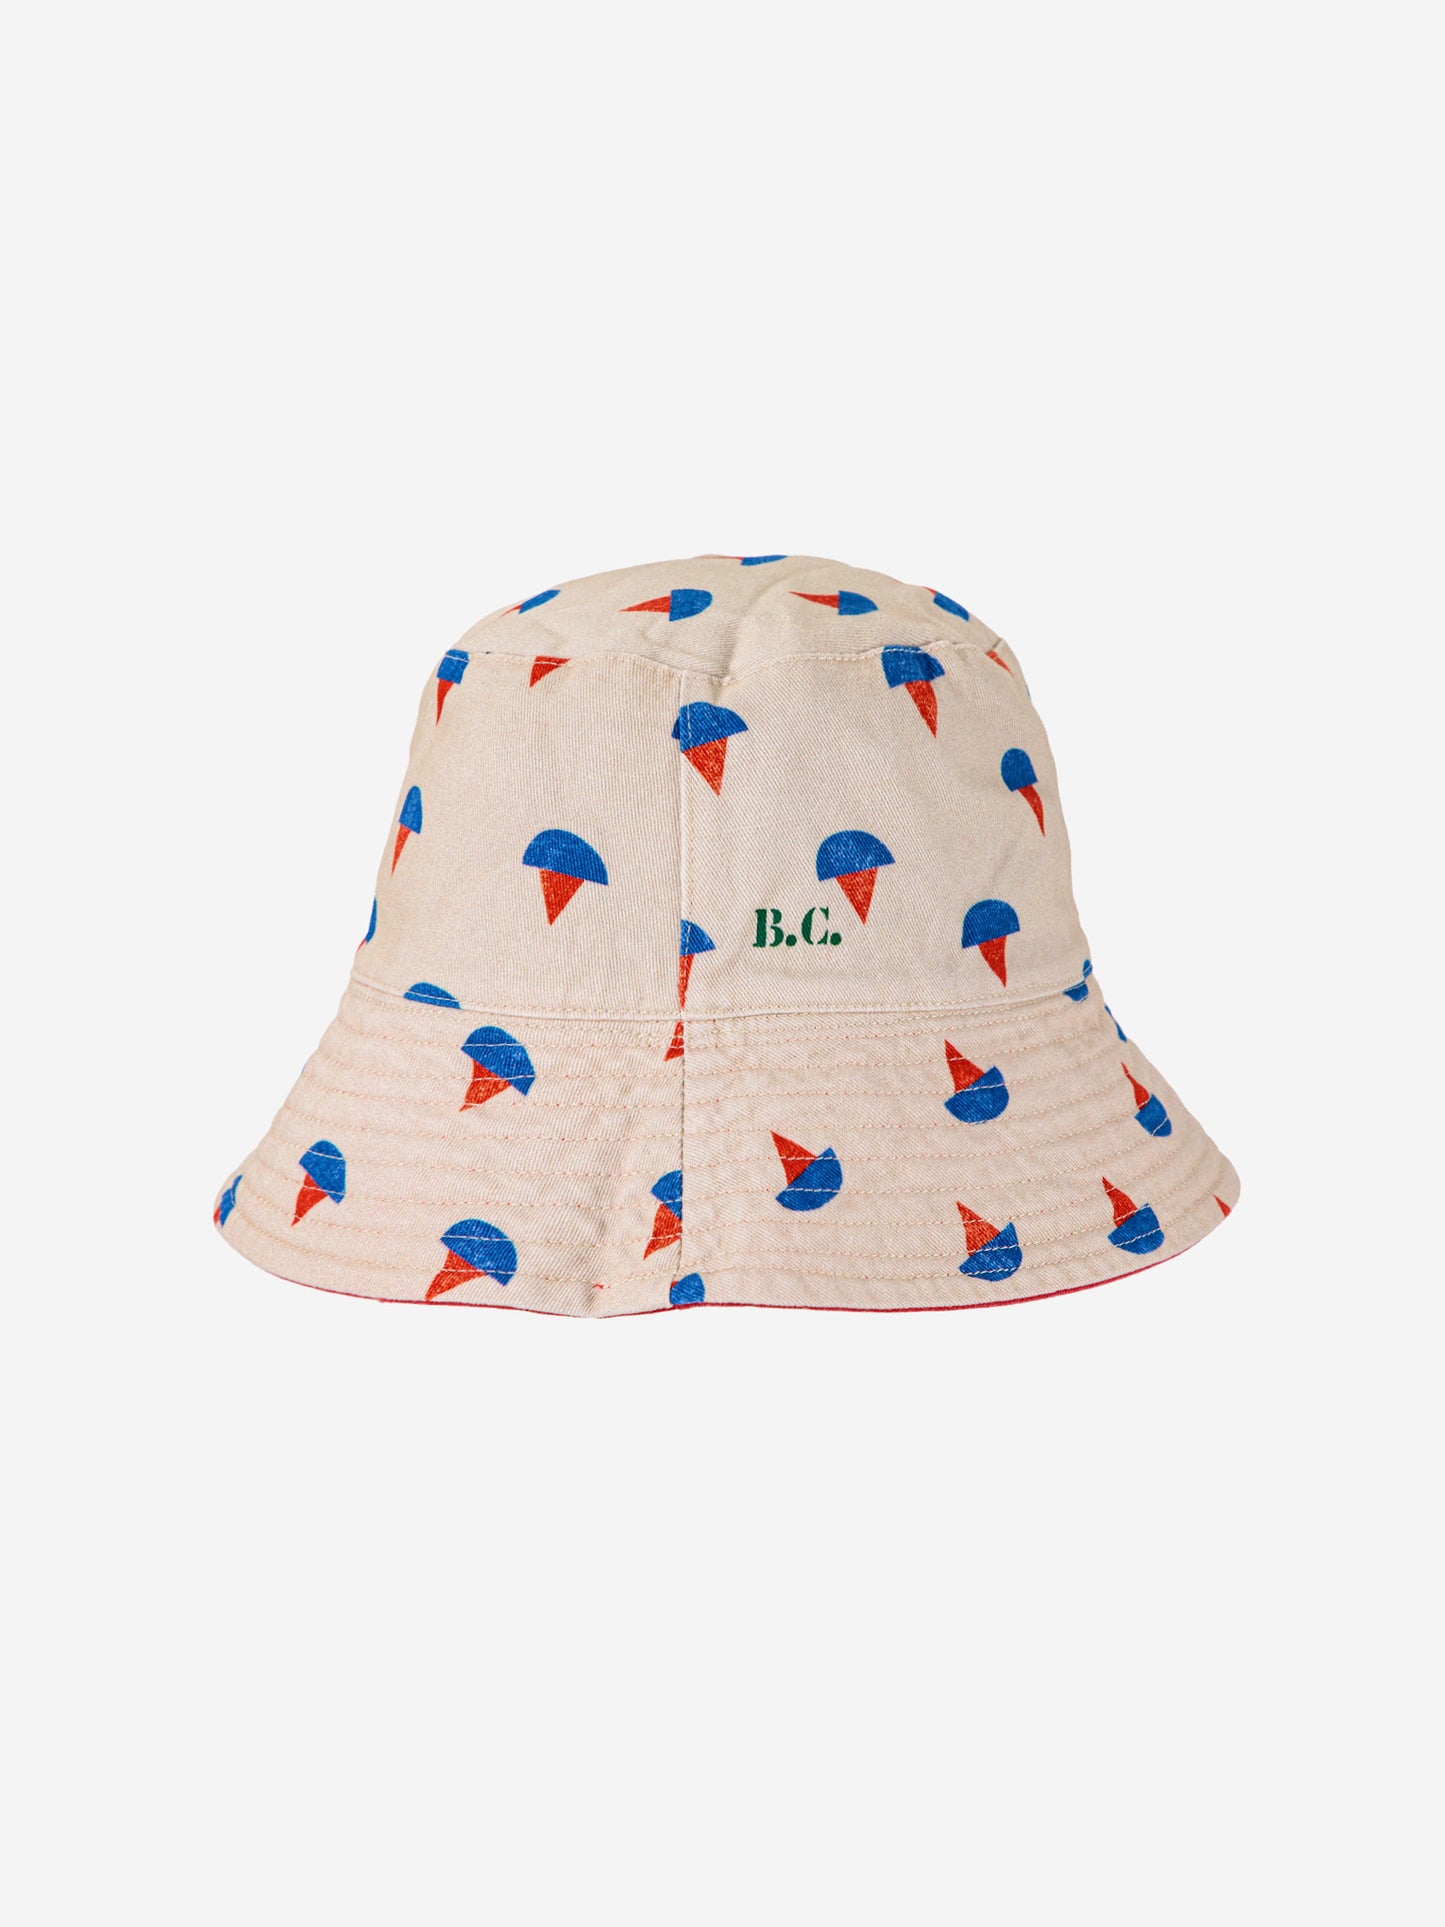 Sail Boat all over reversible hat